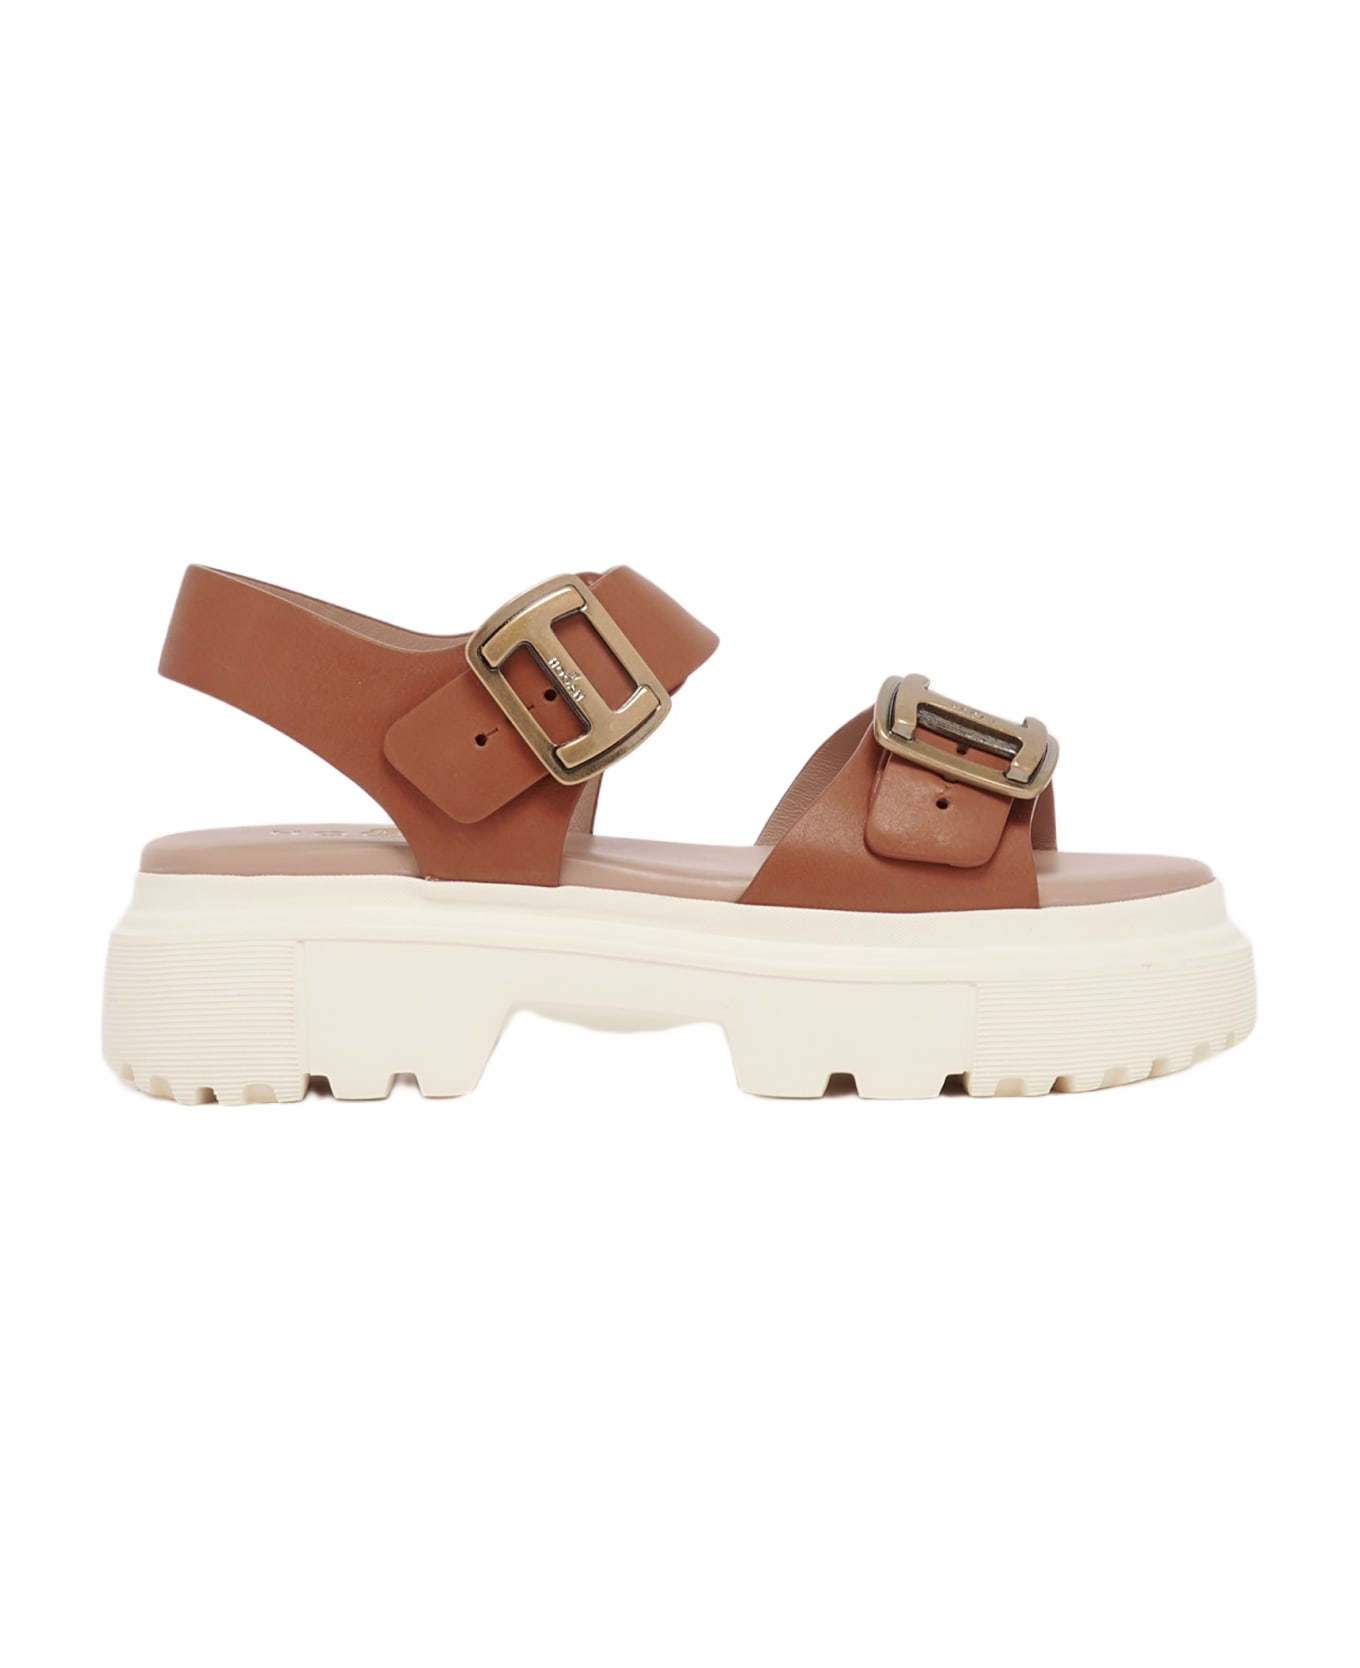 Hogan Sandal With Two Buckles - CUOIO SCURO